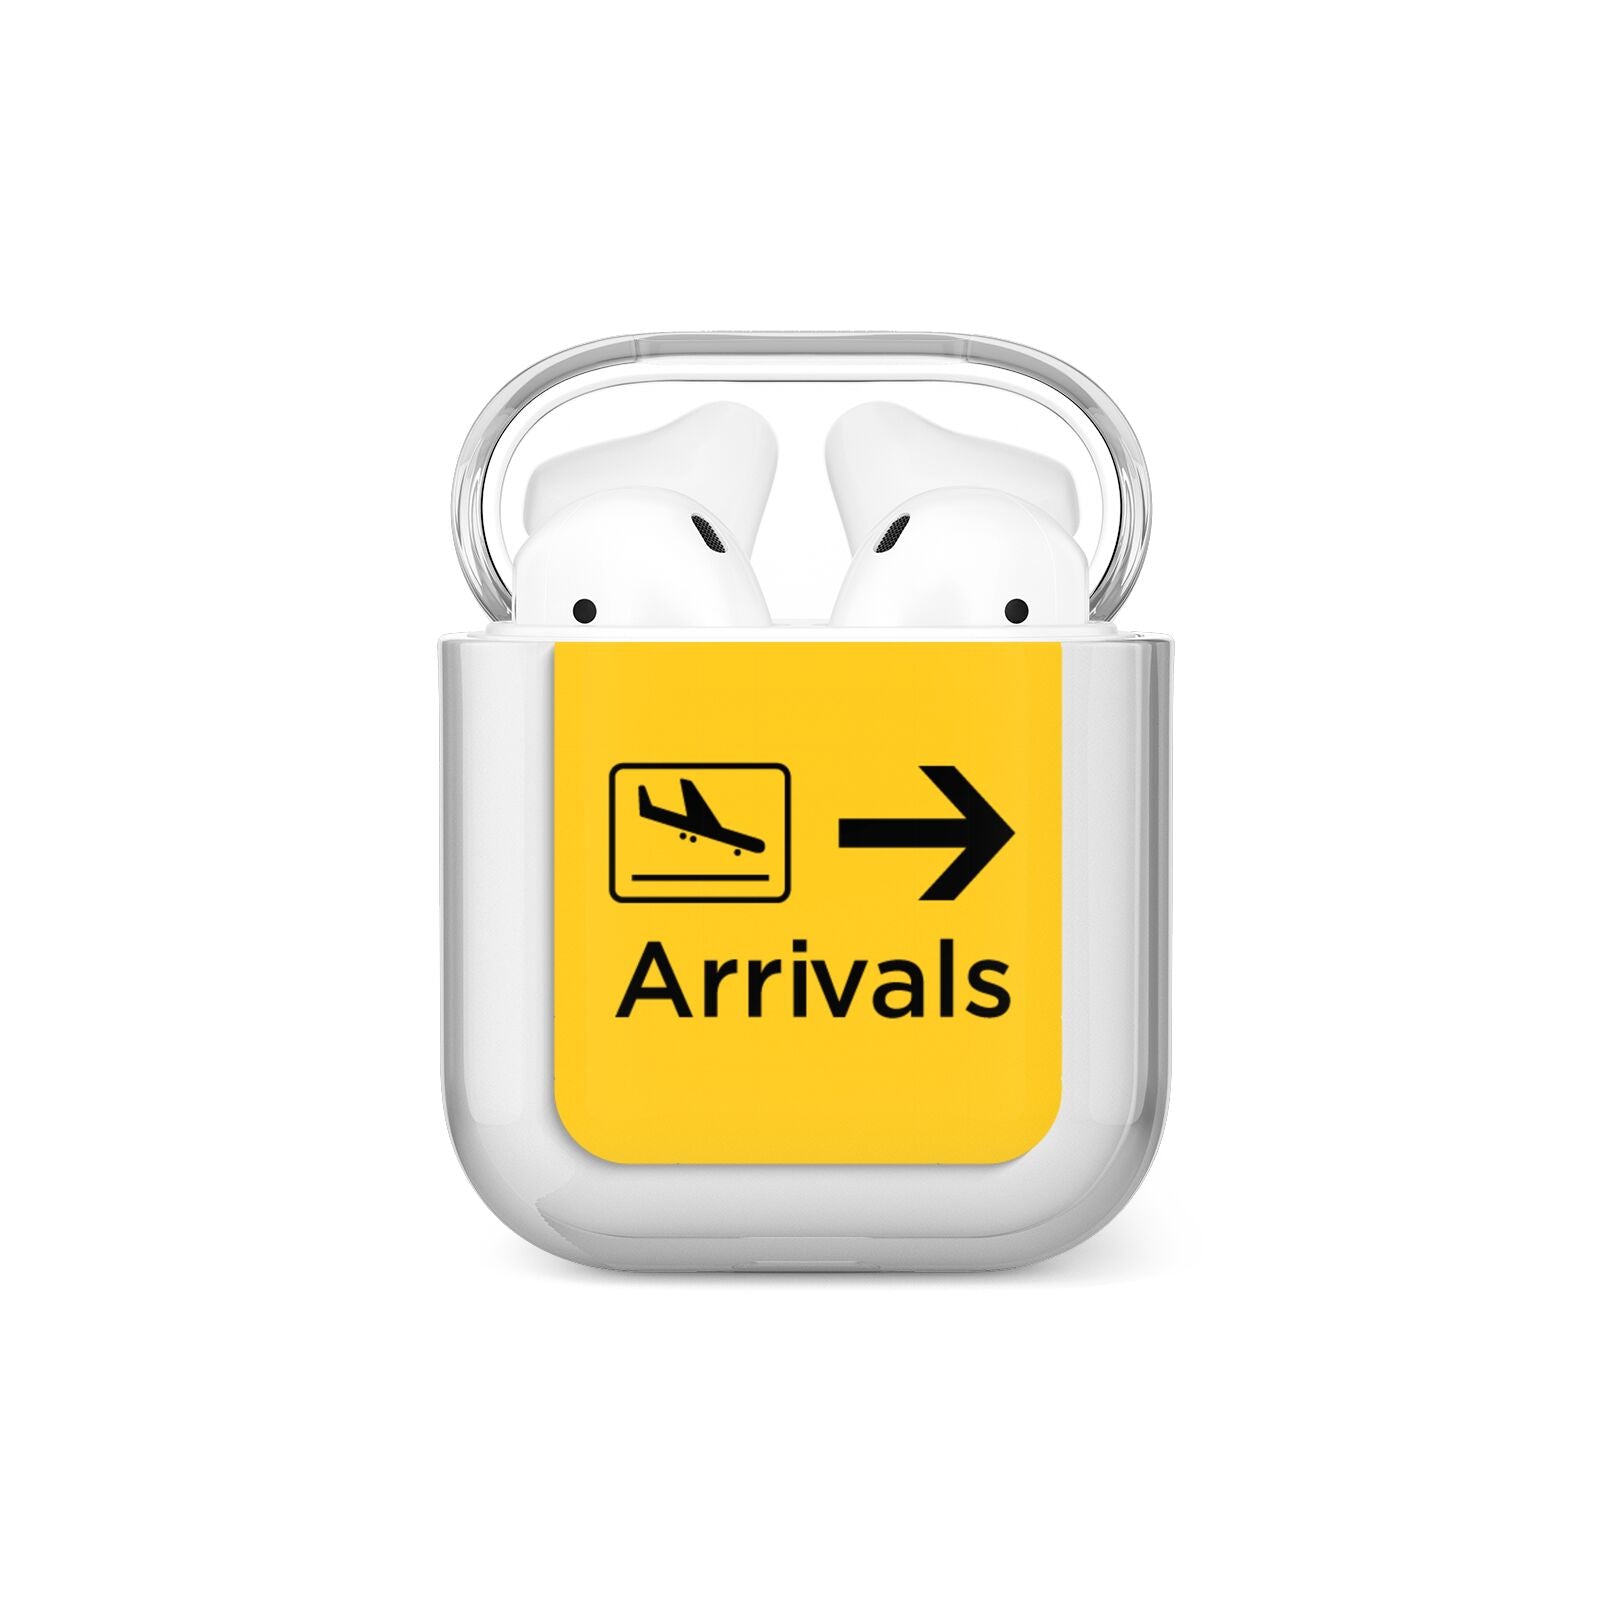 Airport Arrivals AirPods Case